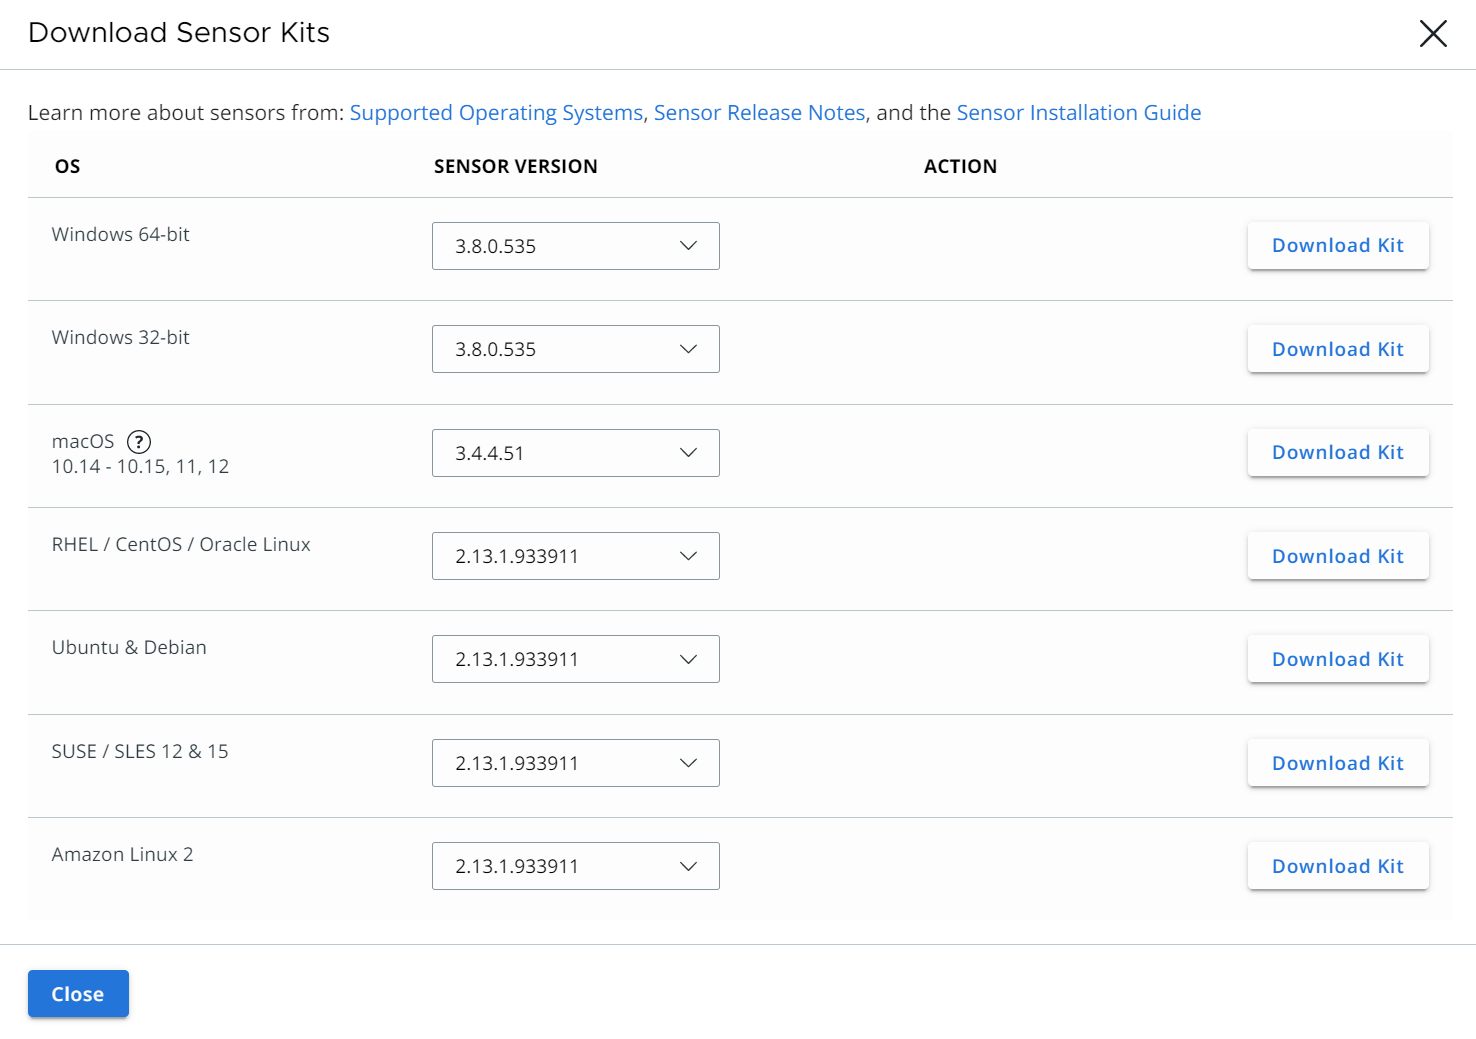 Shows all available sensor kids together with download links